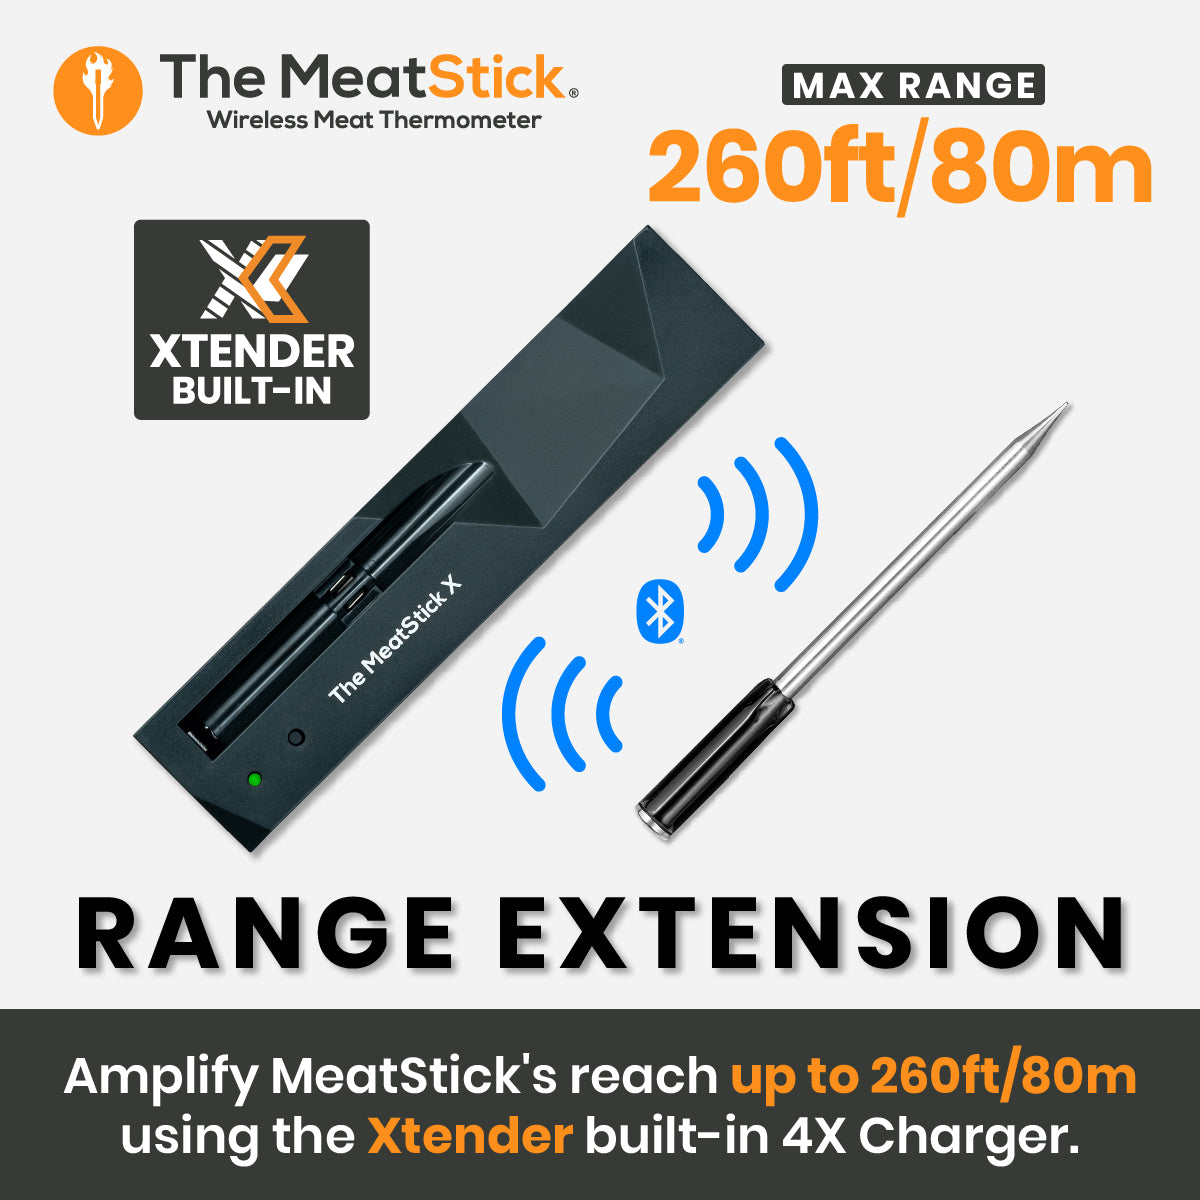 The MEATER Smart Wireless Meat Thermometer is a Big Deal this  Prime  Day – Save 25%